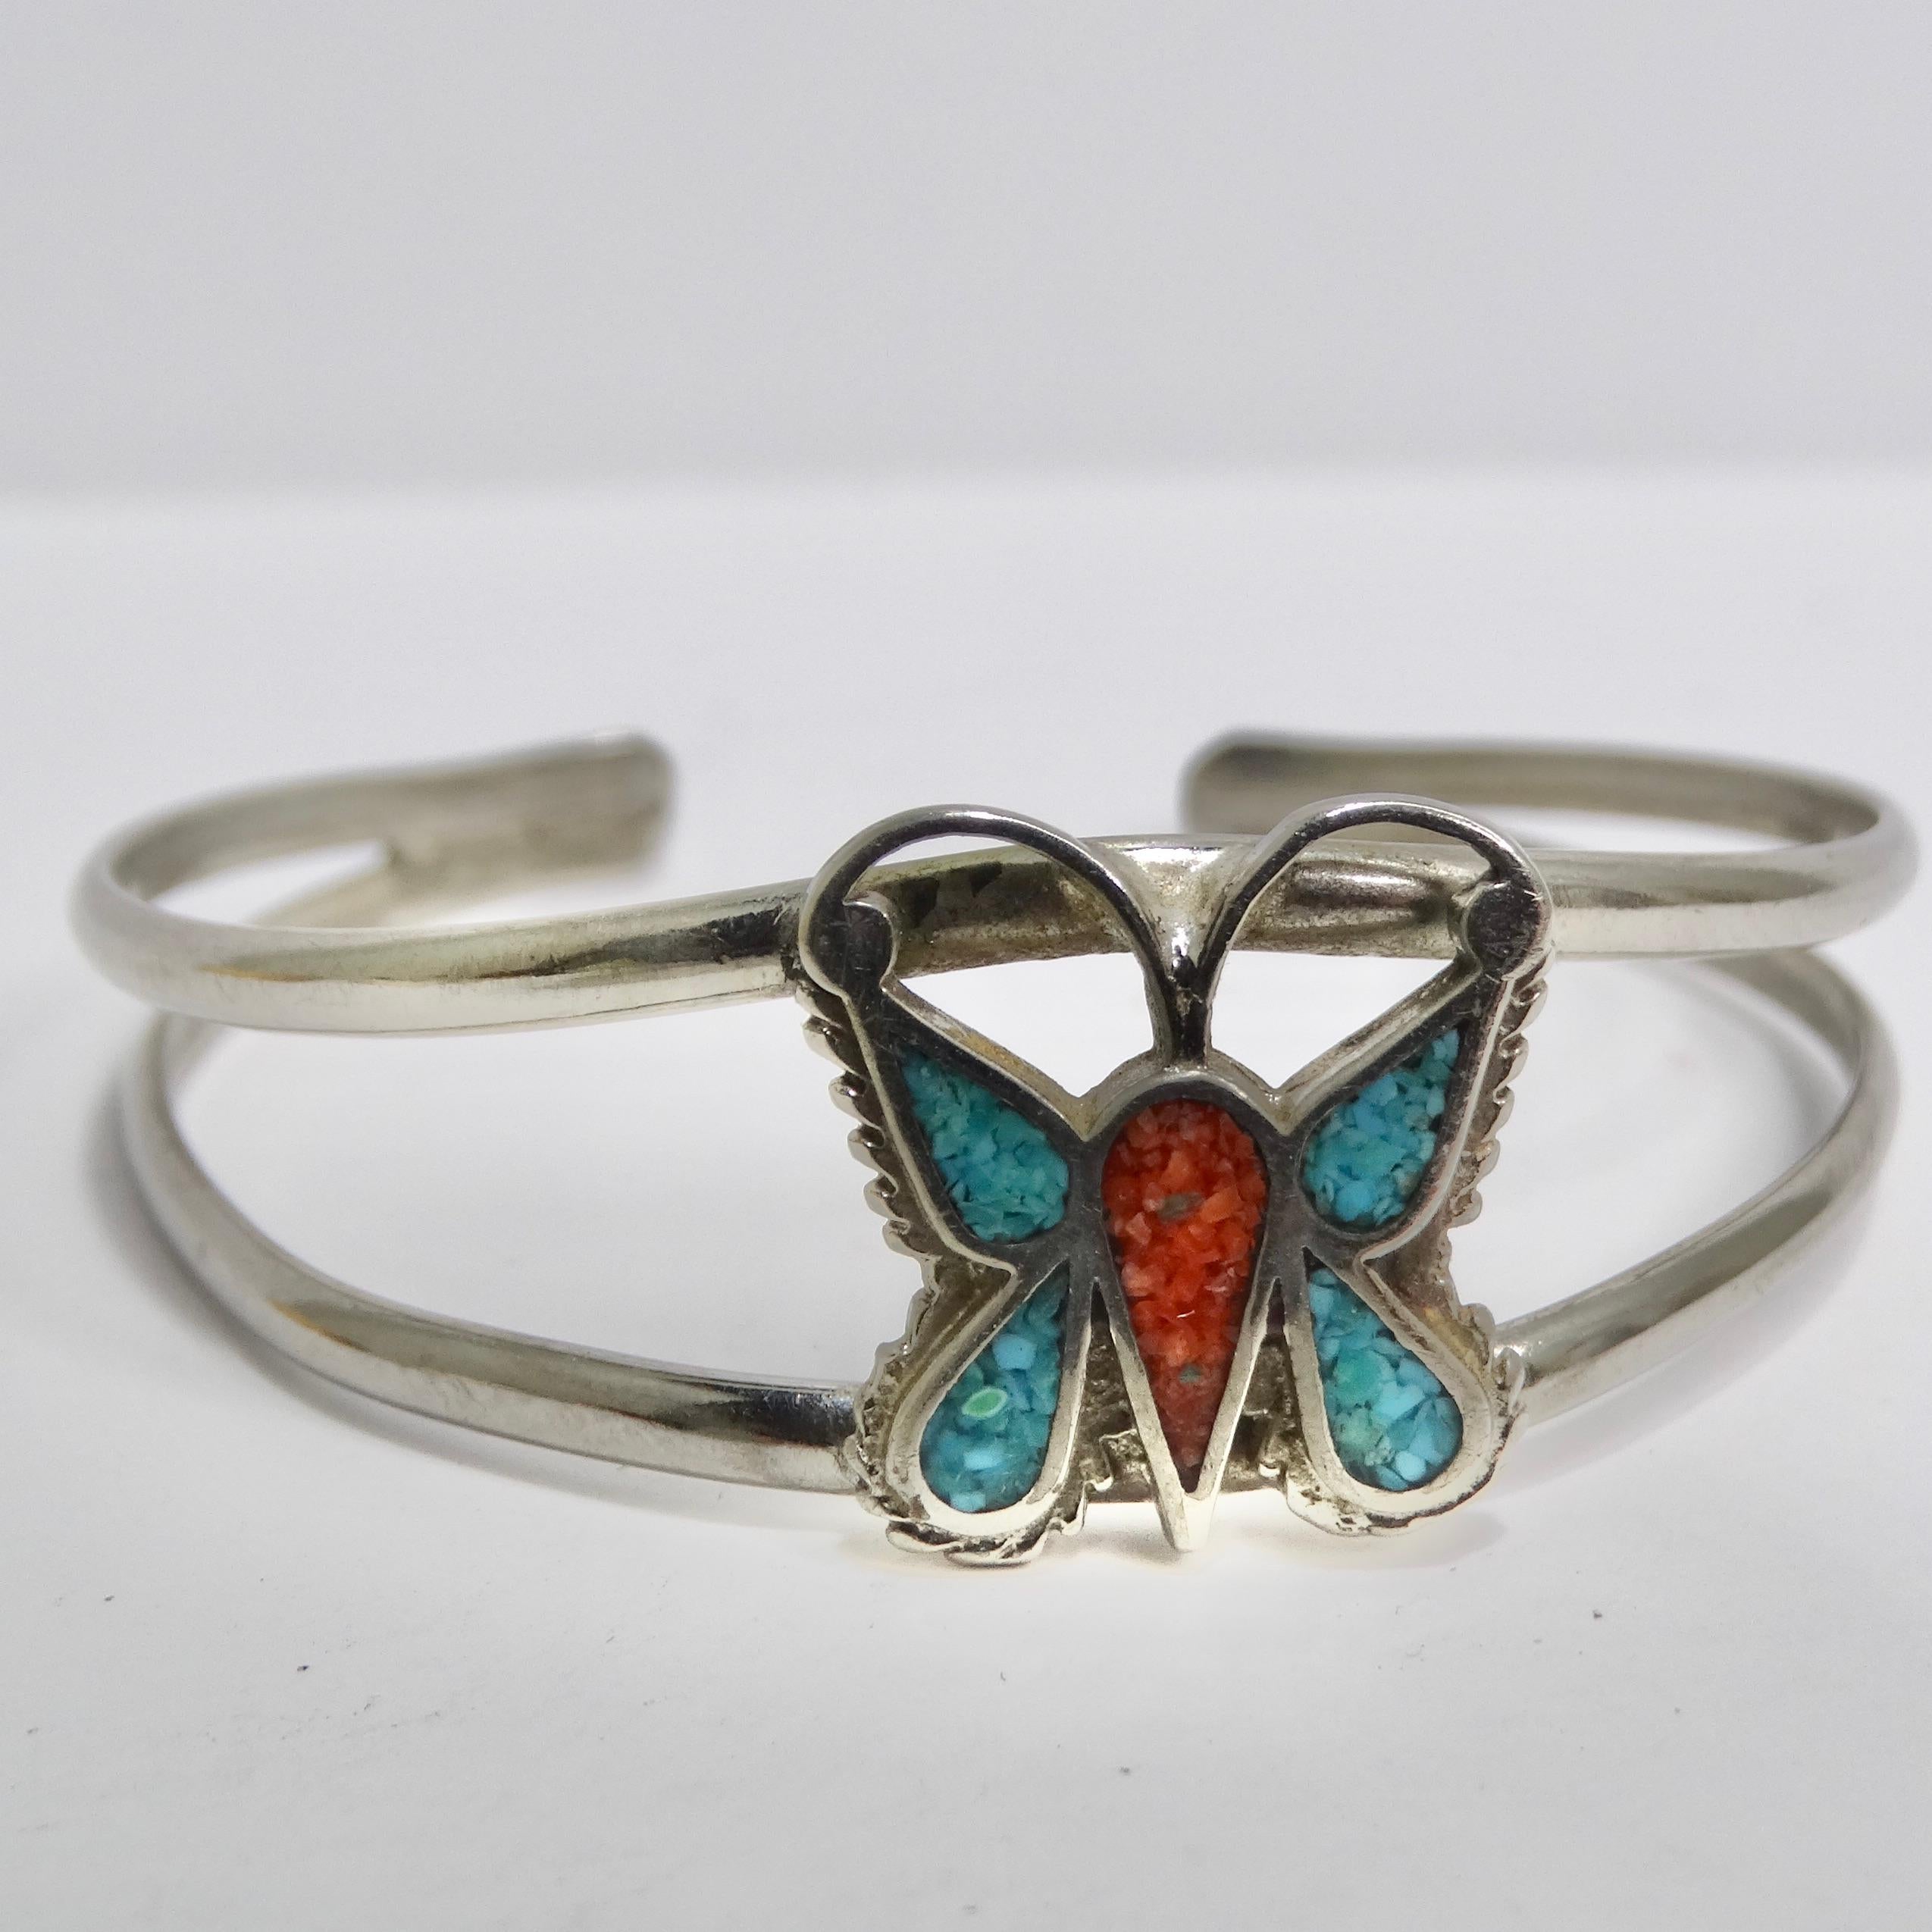 Introducing a timeless piece of Native American artistry: the 1950 Navajo Silver Butterfly Cuff Bracelet. This exquisite bracelet is a testament to the craftsmanship and cultural significance of Navajo jewelry, and it's sure to capture your heart.